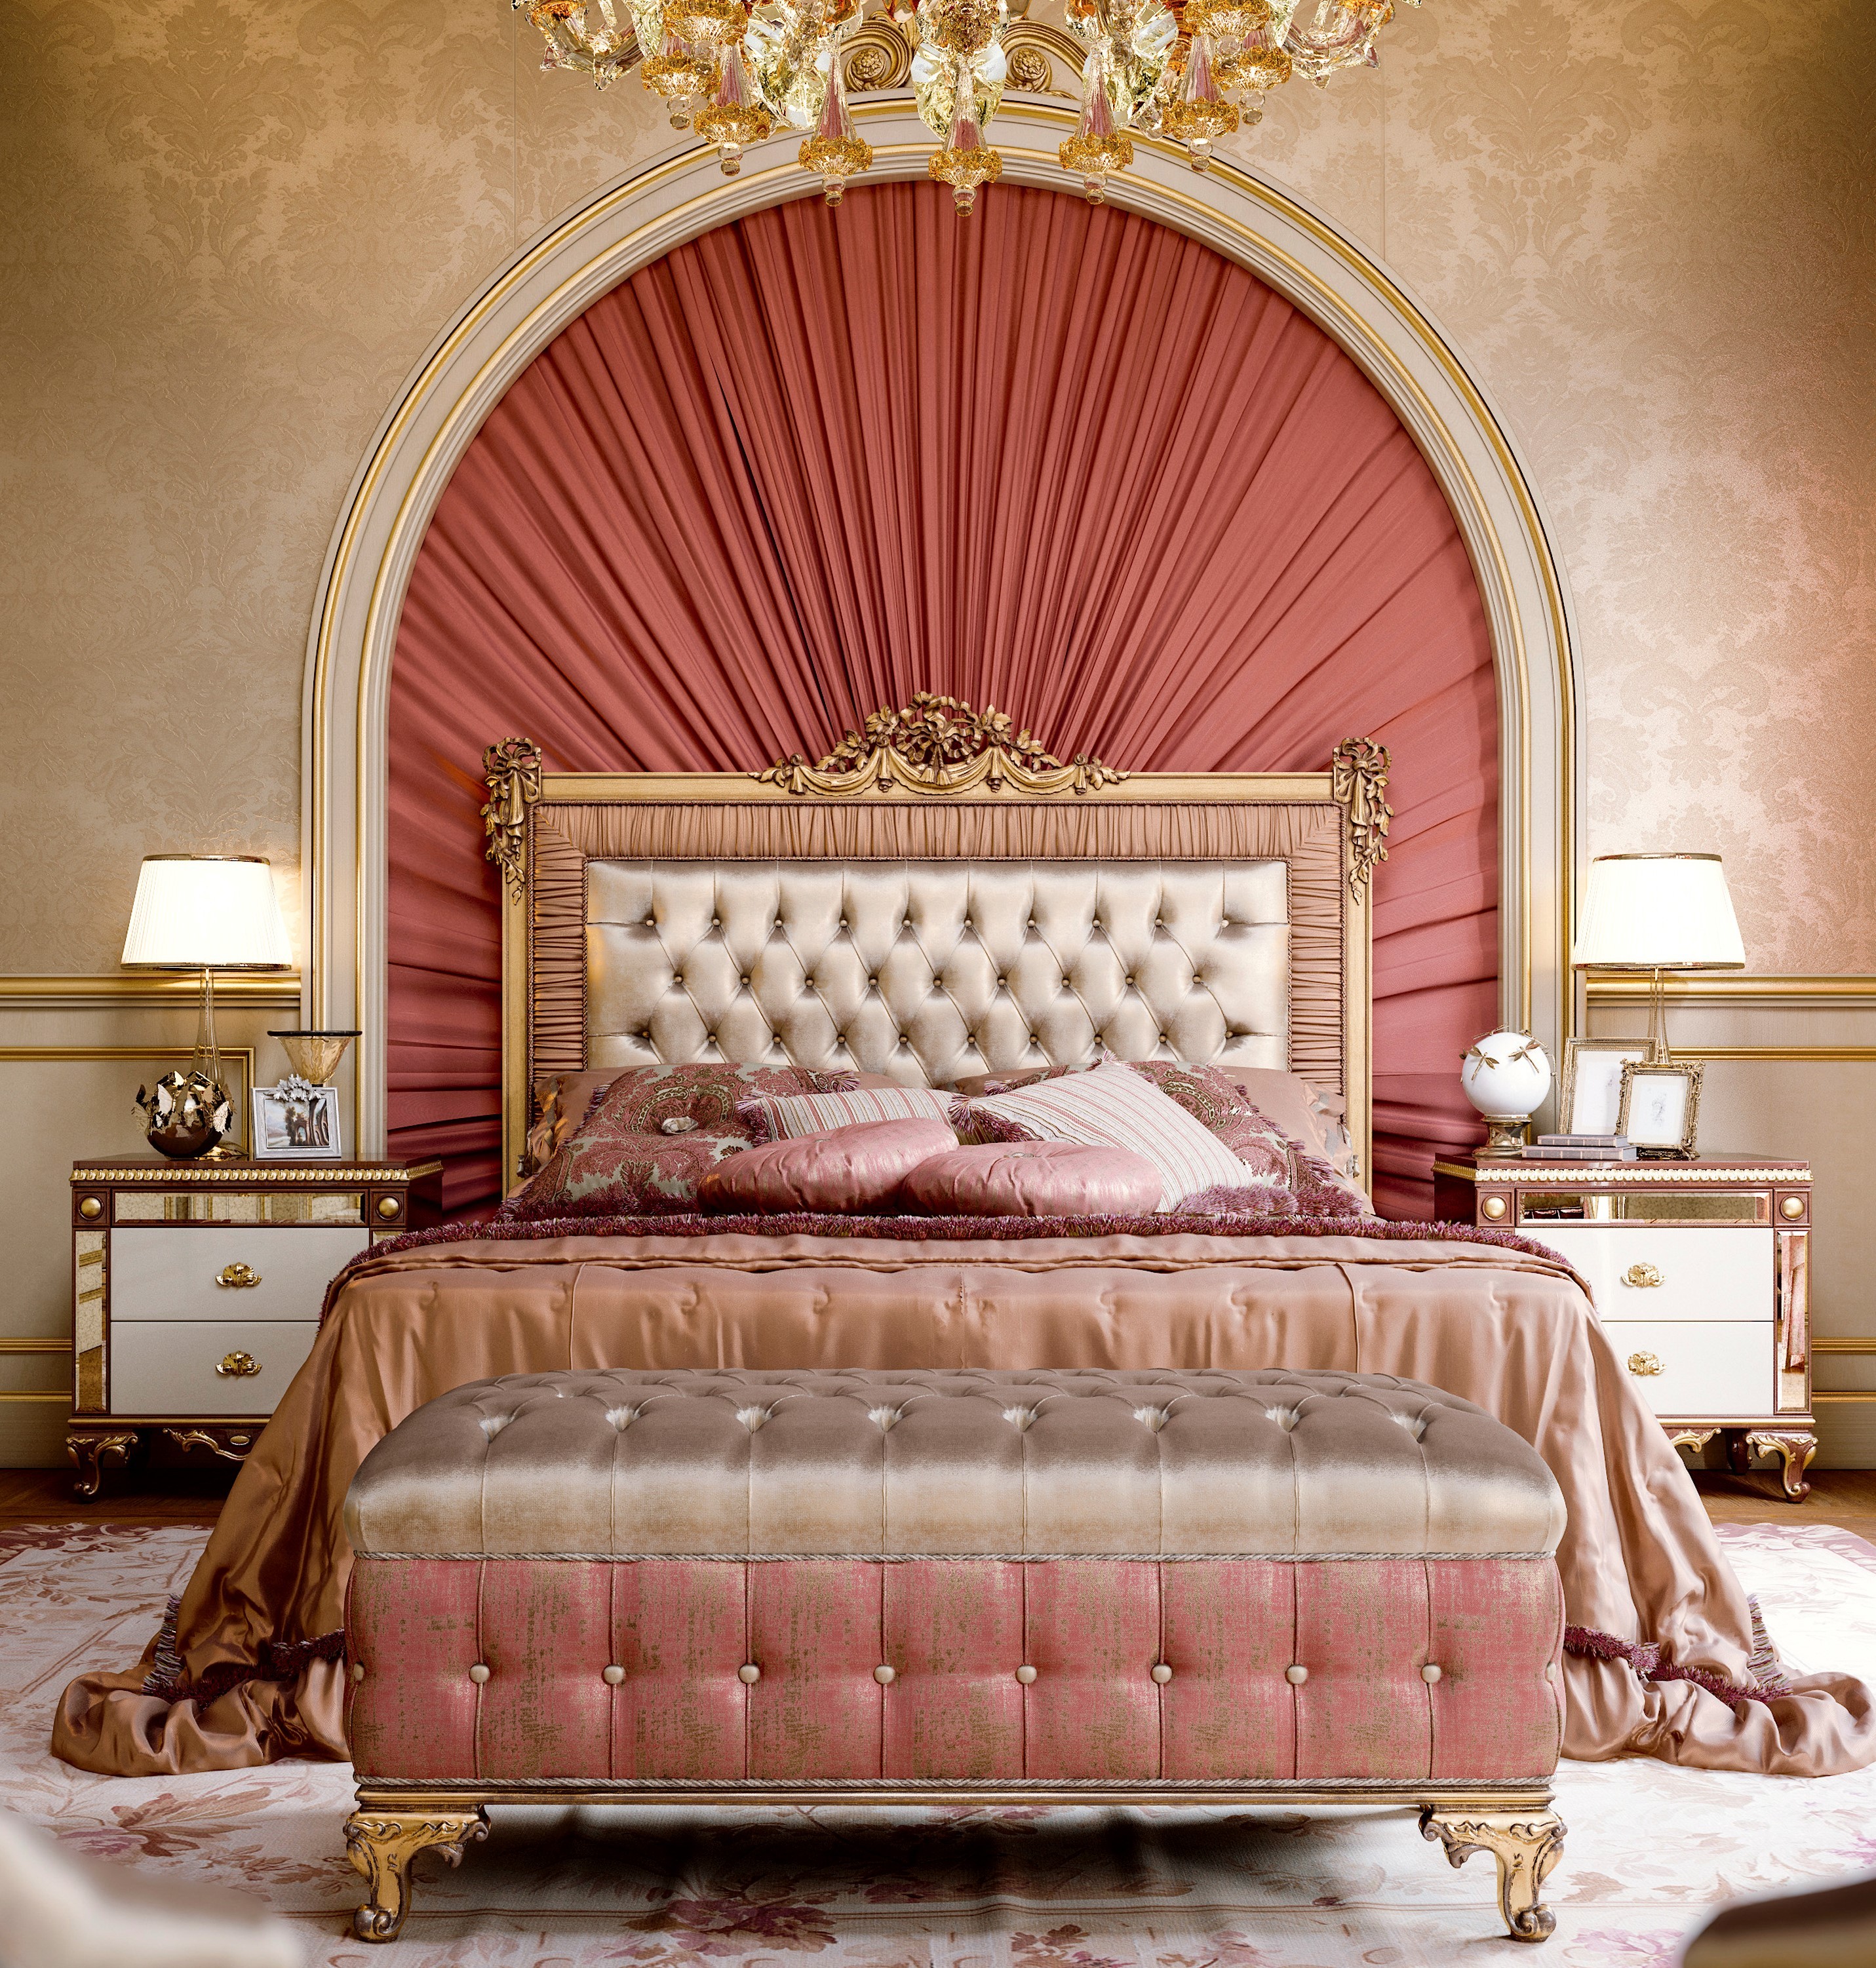 Queen and King Sized Beds Luxurious Bed with Tufted Headboard